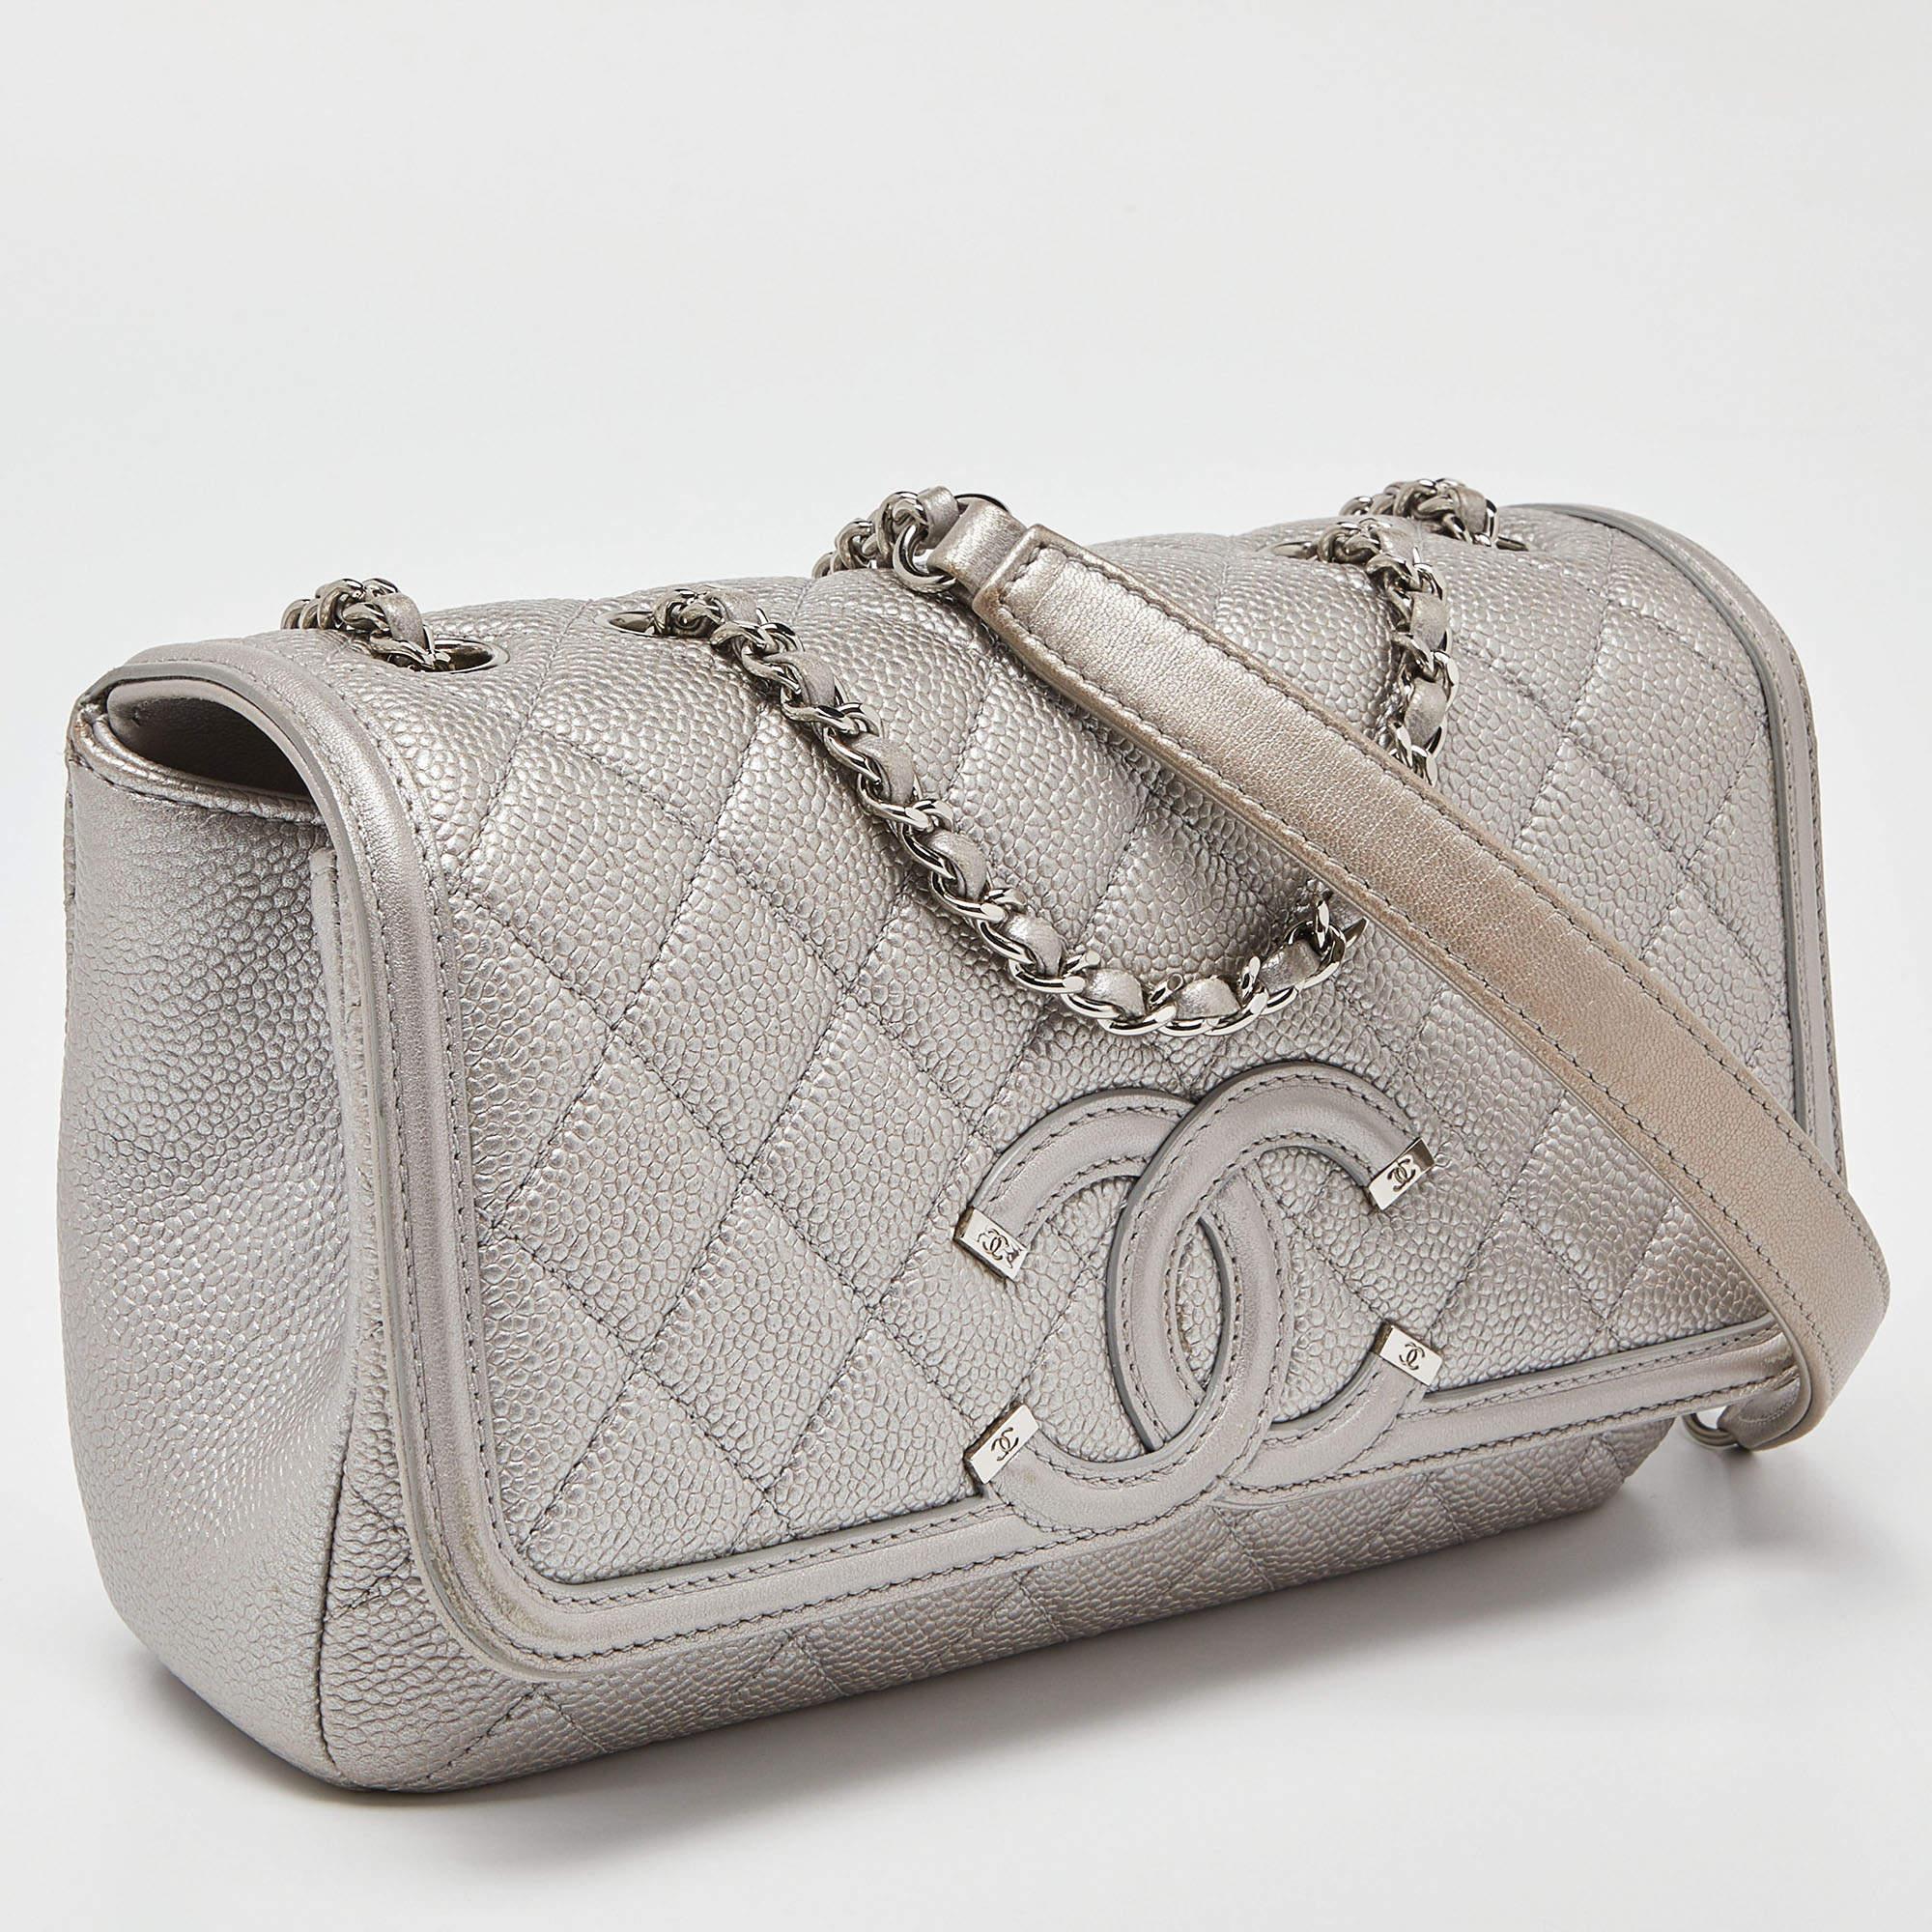 This Filigree Flap bag from Chanel exudes the right amount of class and elegance. Crafted from silver Caviar leather, this bag is adorned with a 60 cm strap and silver-toned hardware. It has a leather-lined interior. Make this Chanel bag yours today